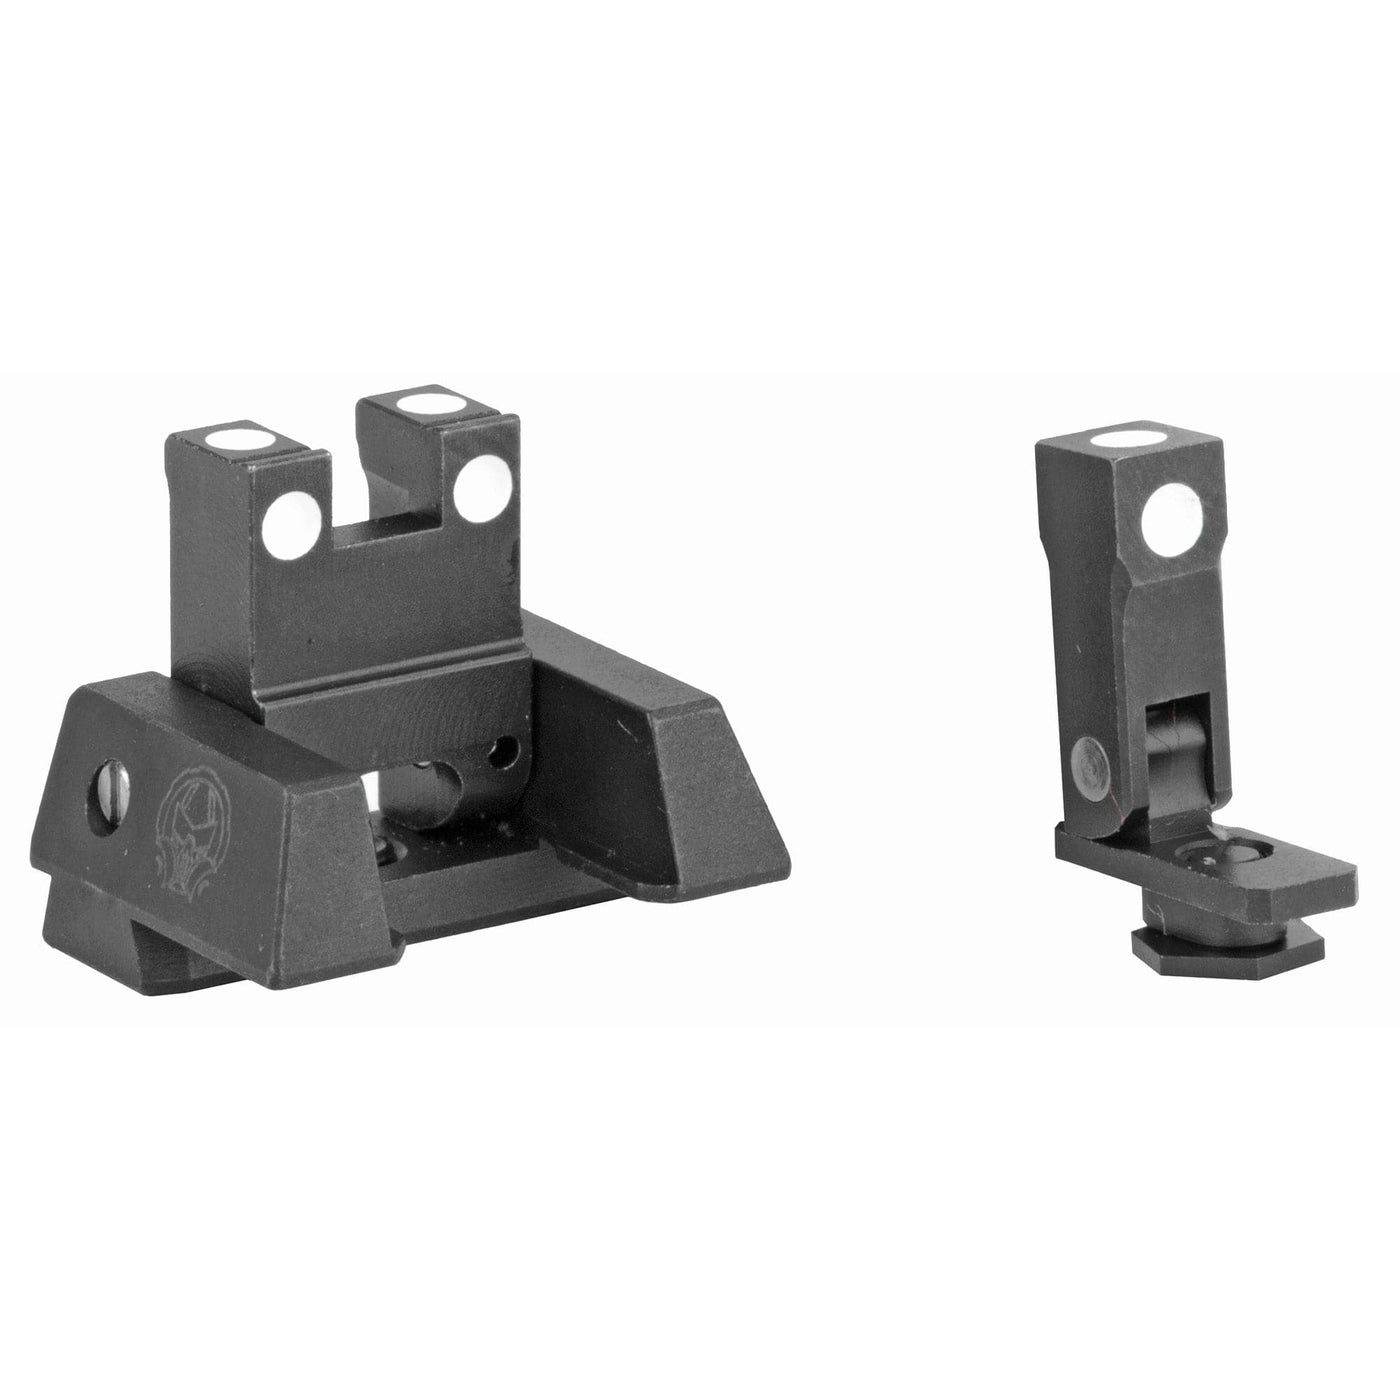 KNS Precision, Inc. Kns Switch Sight For Glock Blk Sights/Lasers/Lights